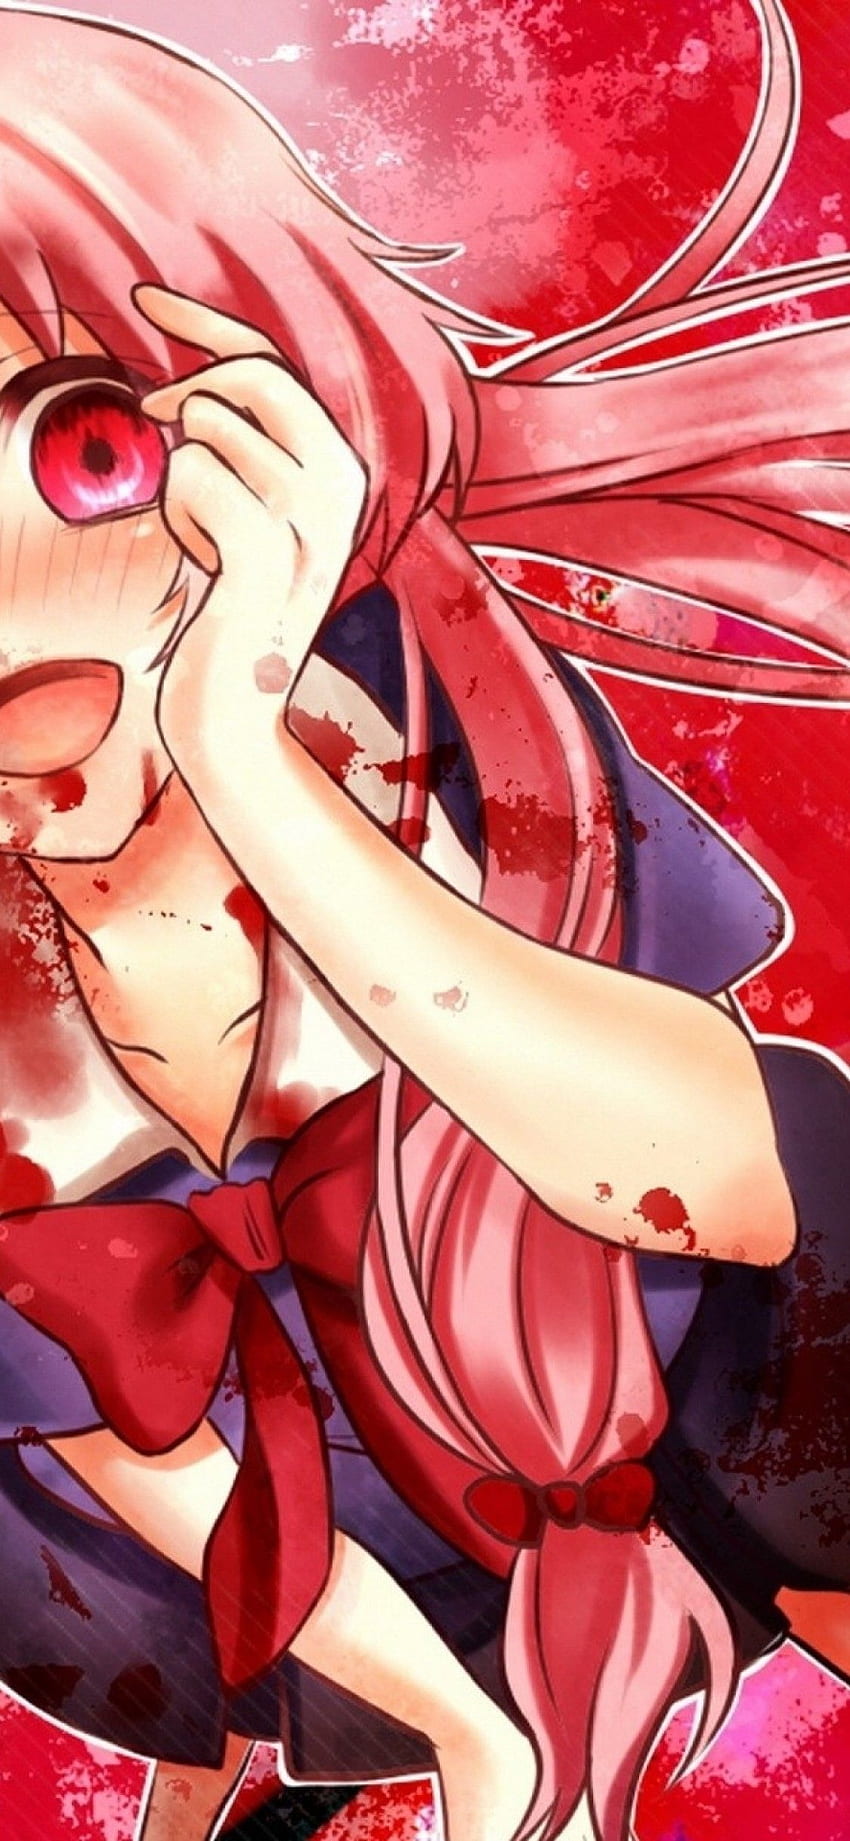 Details more than 75 pink hair yandere anime - in.cdgdbentre